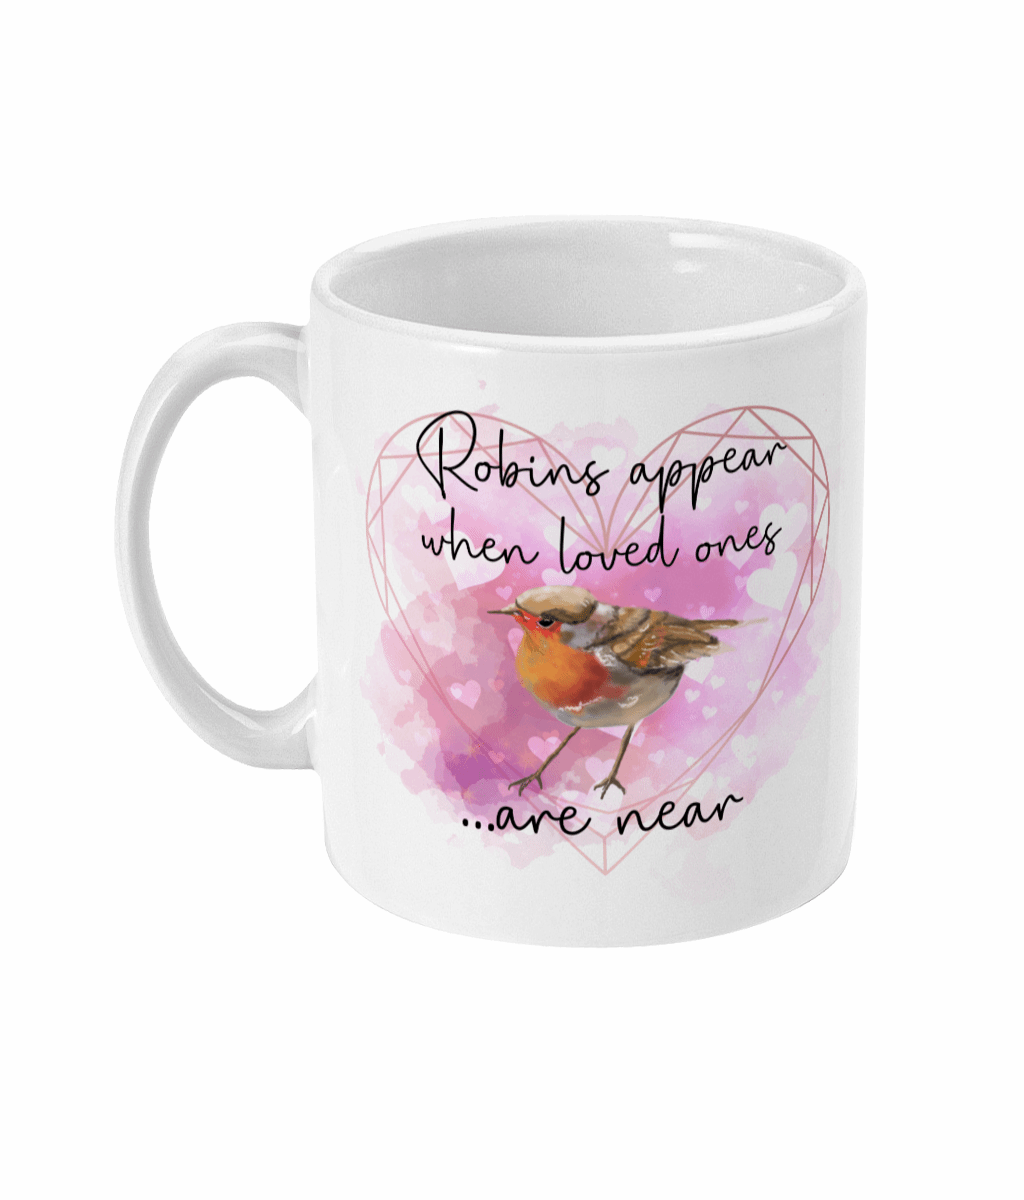  Robins Appear When Loved Ones Are Near Mug by Free Spirit Accessories sold by Free Spirit Accessories